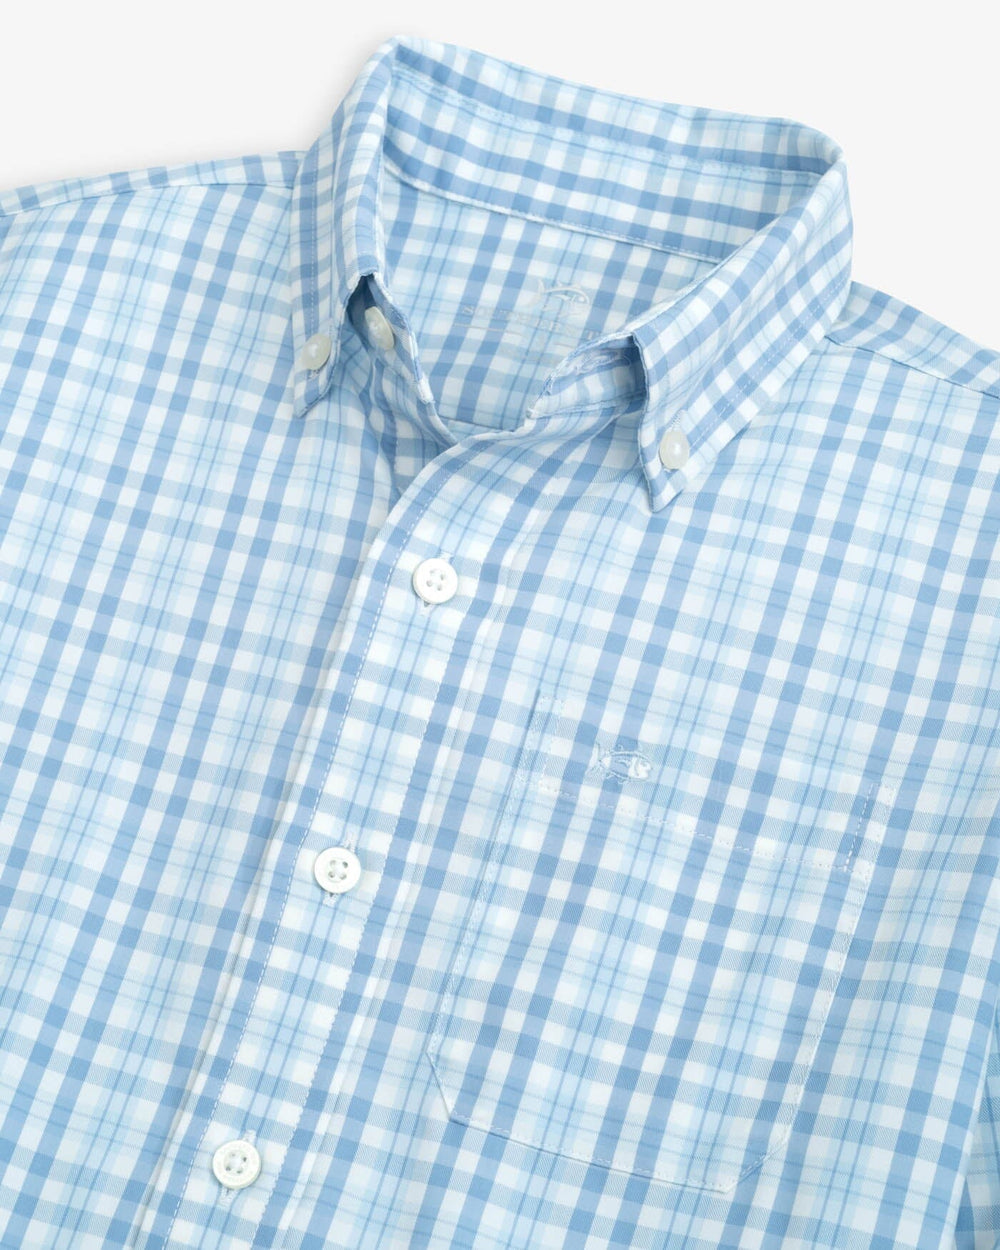 The detail view of the Southern Tide Boys Haywood Plaid Intercoastal Long Sleeve Sportshirt by Southern Tide - Dream Blue